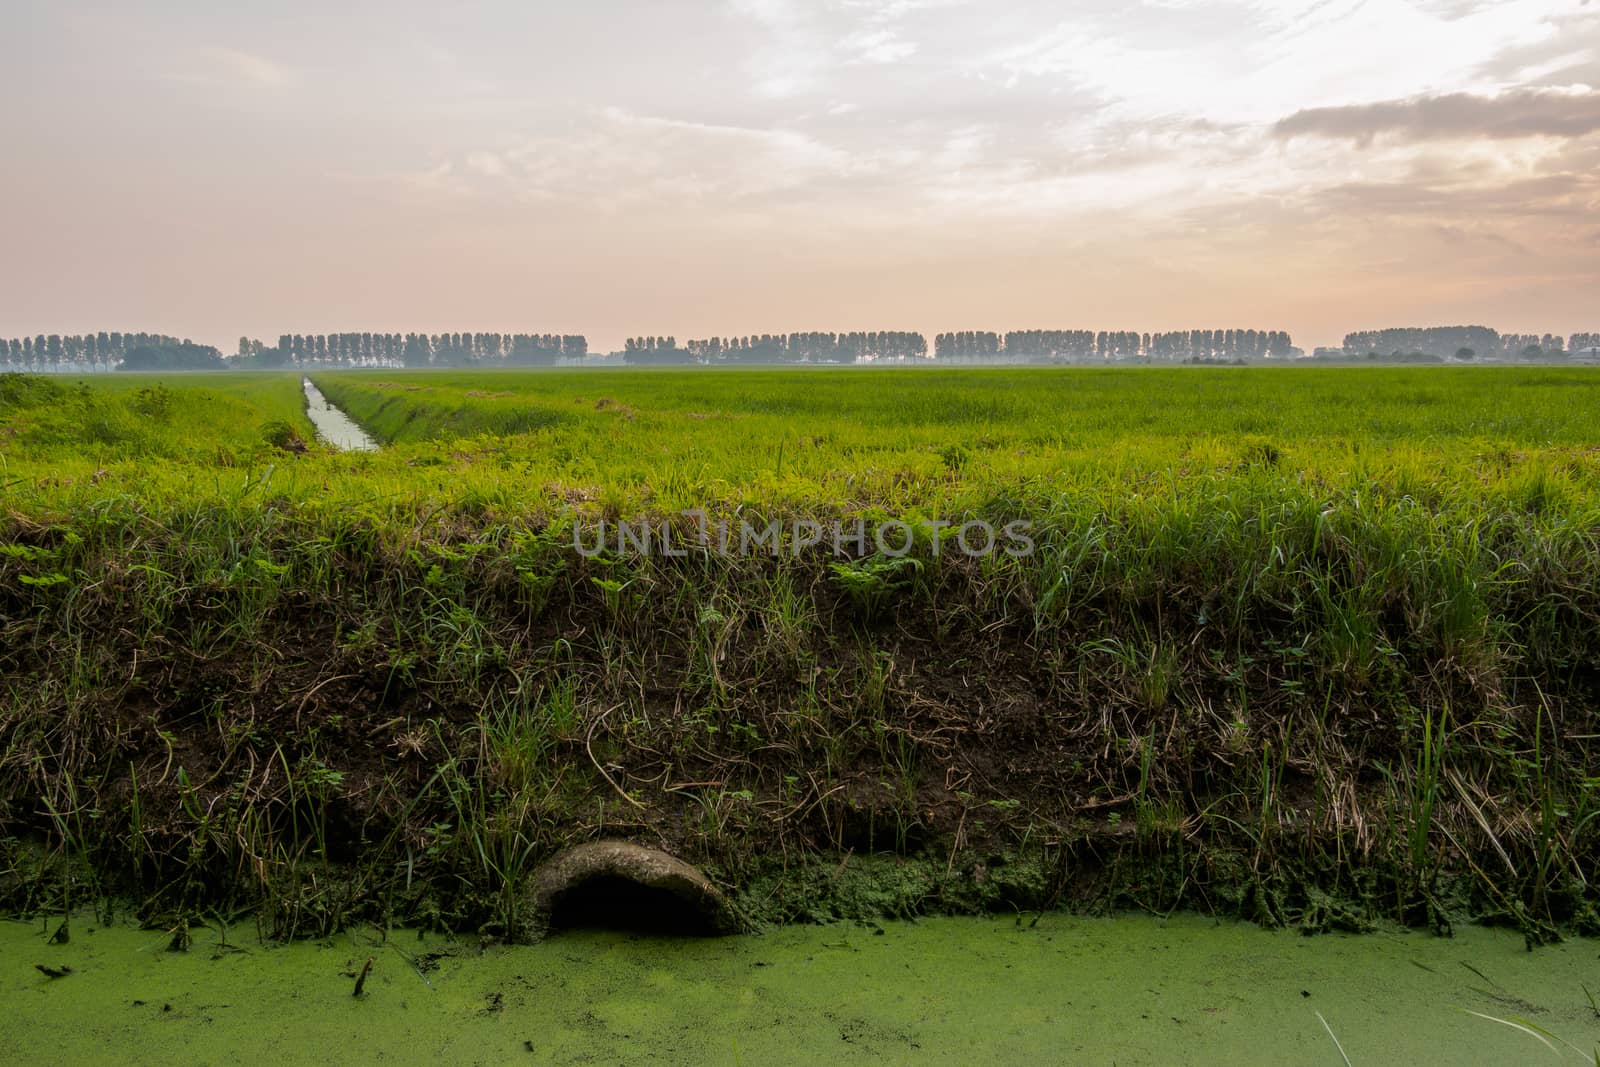 Duckweed covered ditch in typical dutch landscape